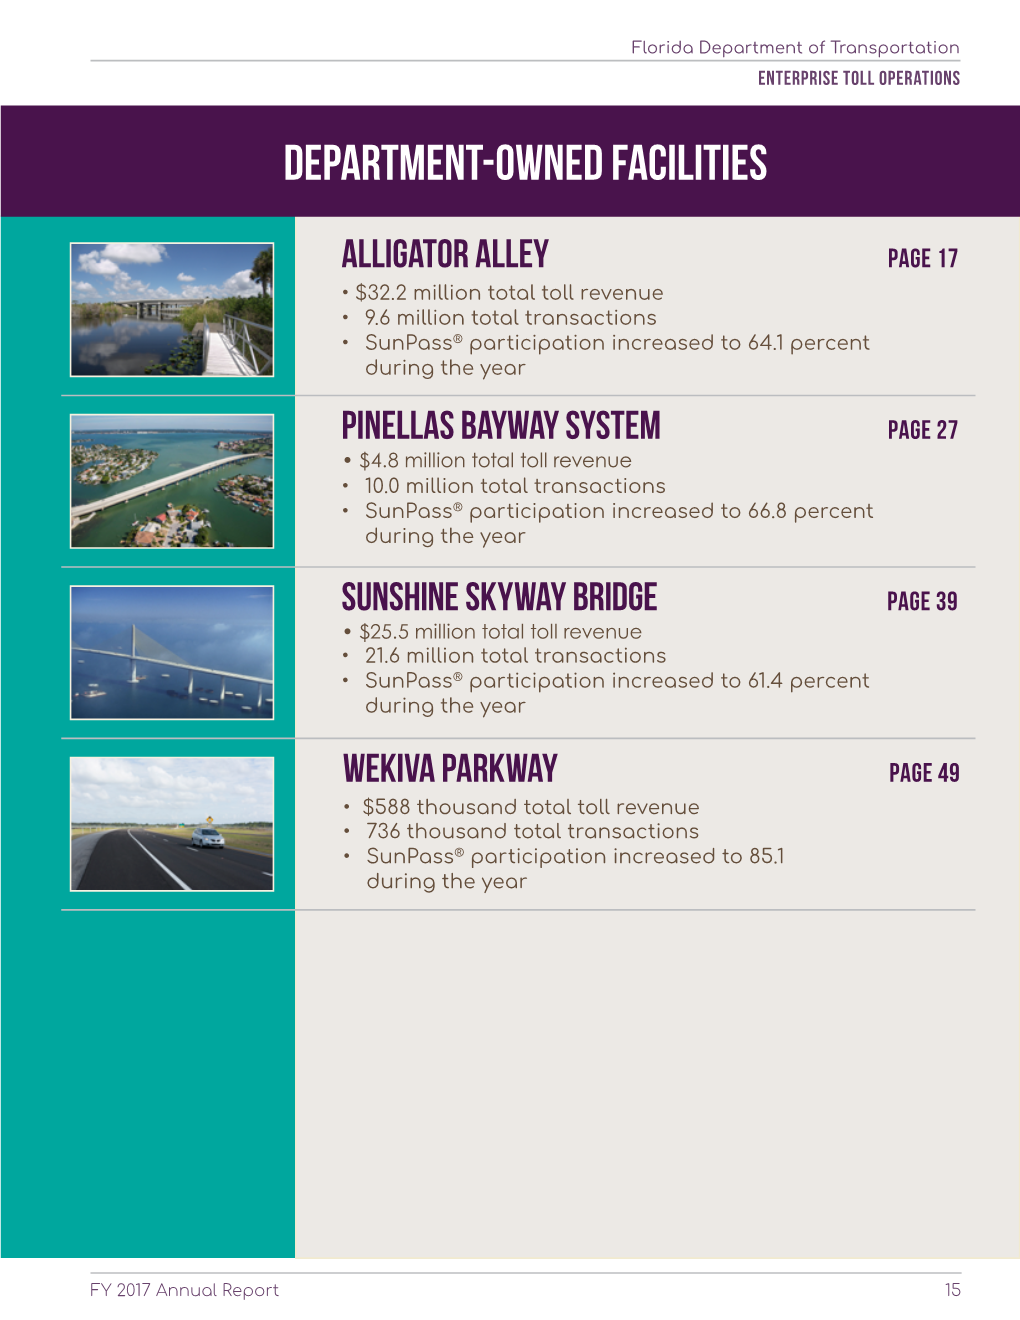 Department-Owned Facilities